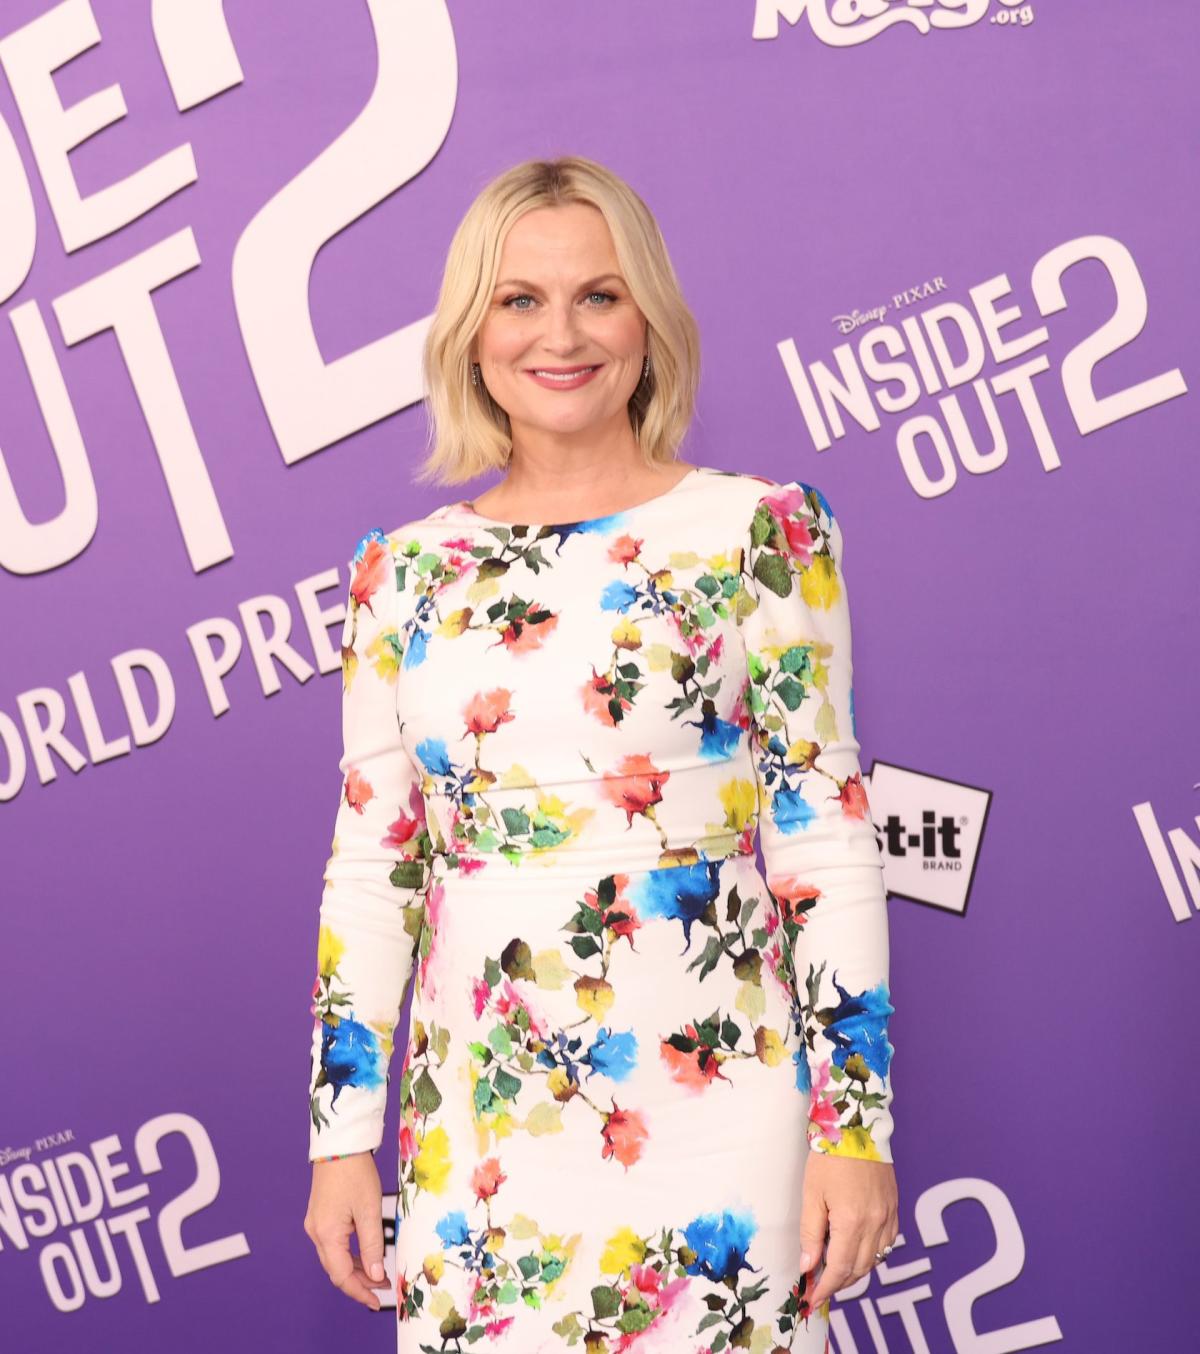 Amy Poehler Is 'So Proud' to Portray Joy in Disney's 'Inside Out 2': A  'Dream Come True'